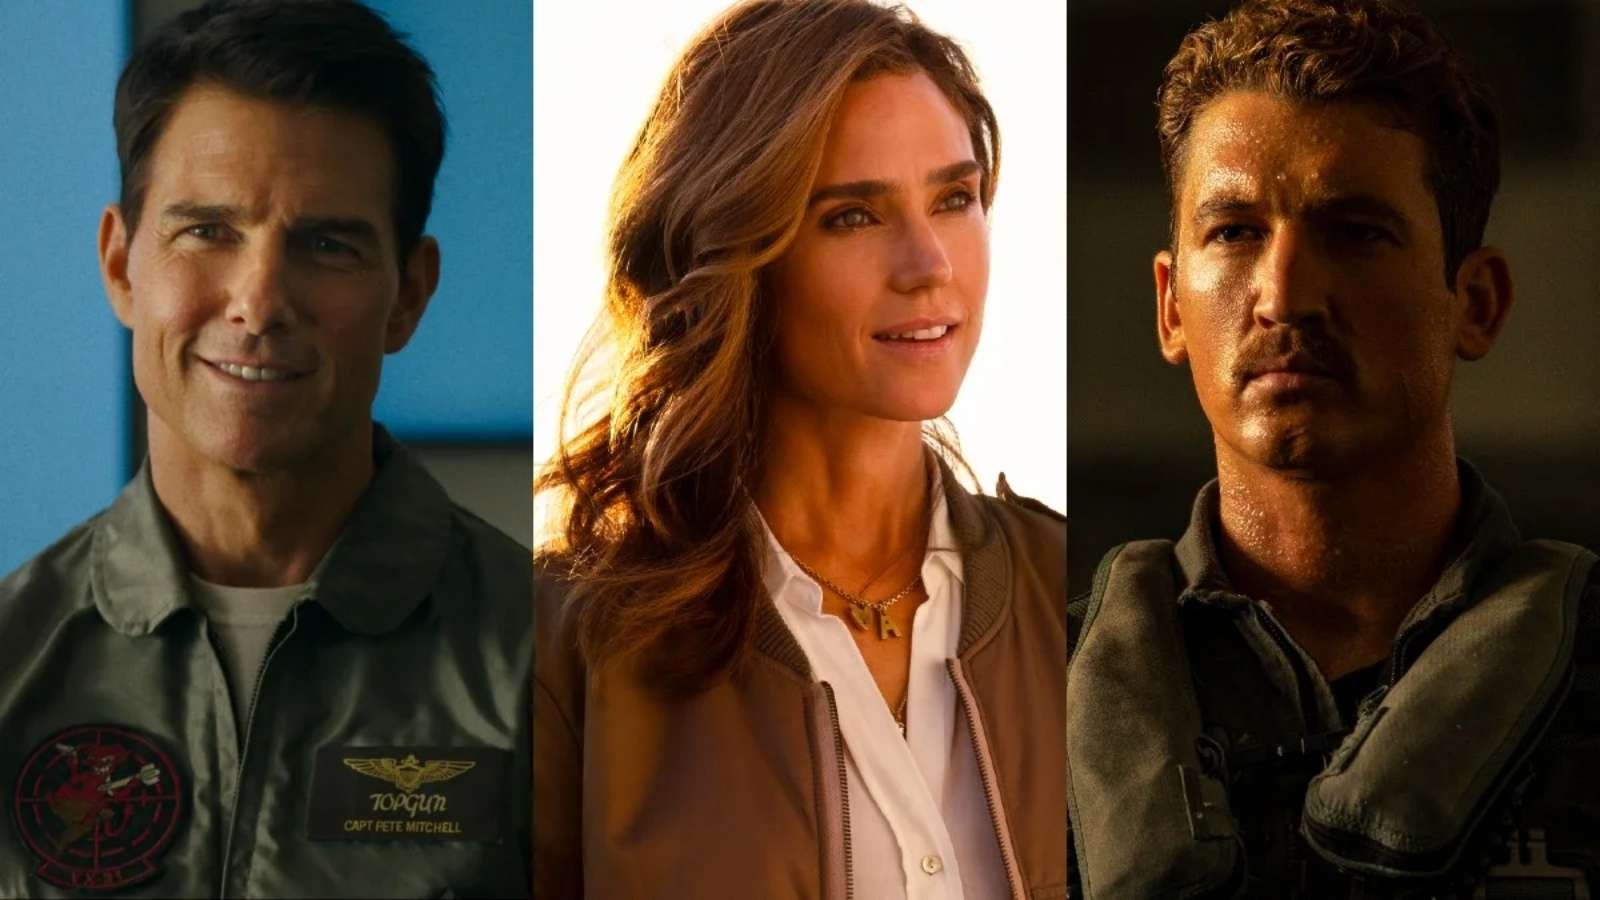 Top Gun: Maverick Cast Storyline Characters and Where They Are Now